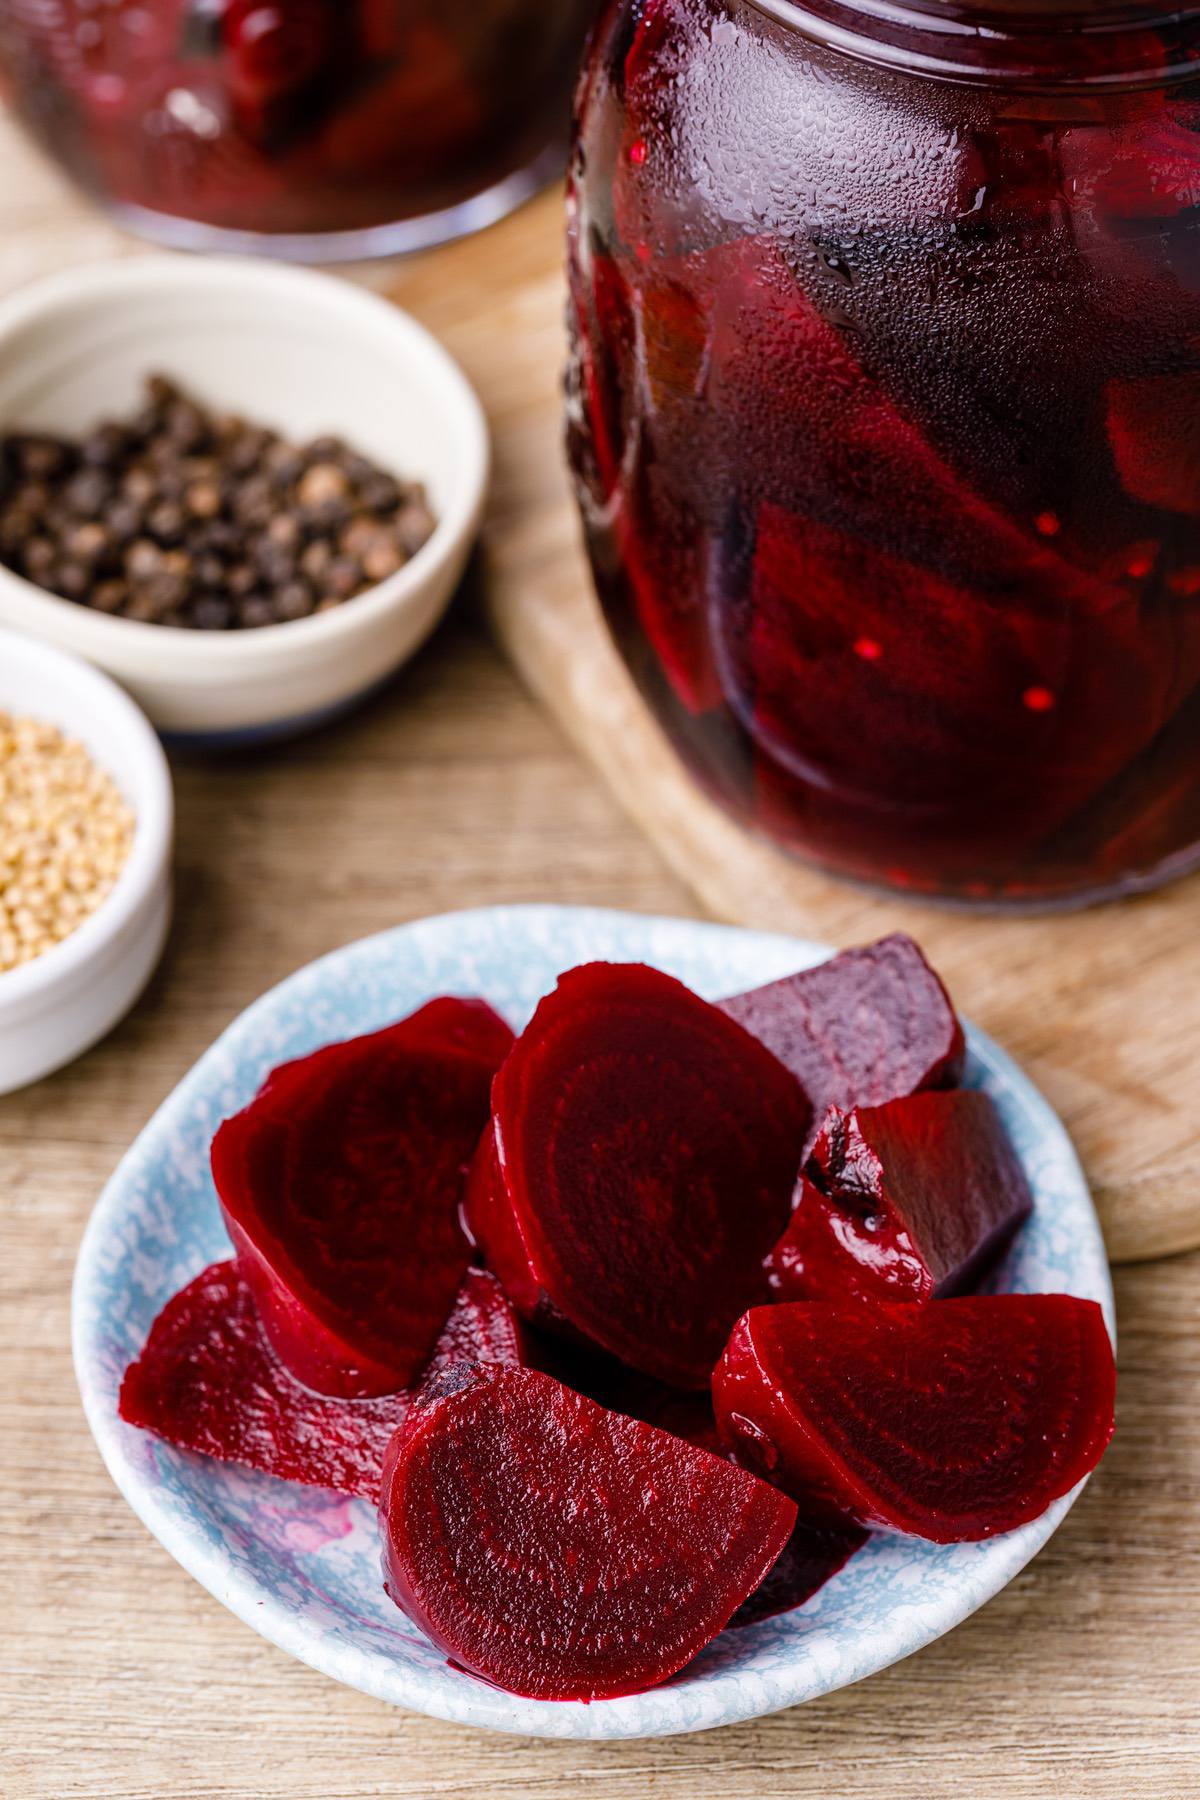 Best Pickled Beets